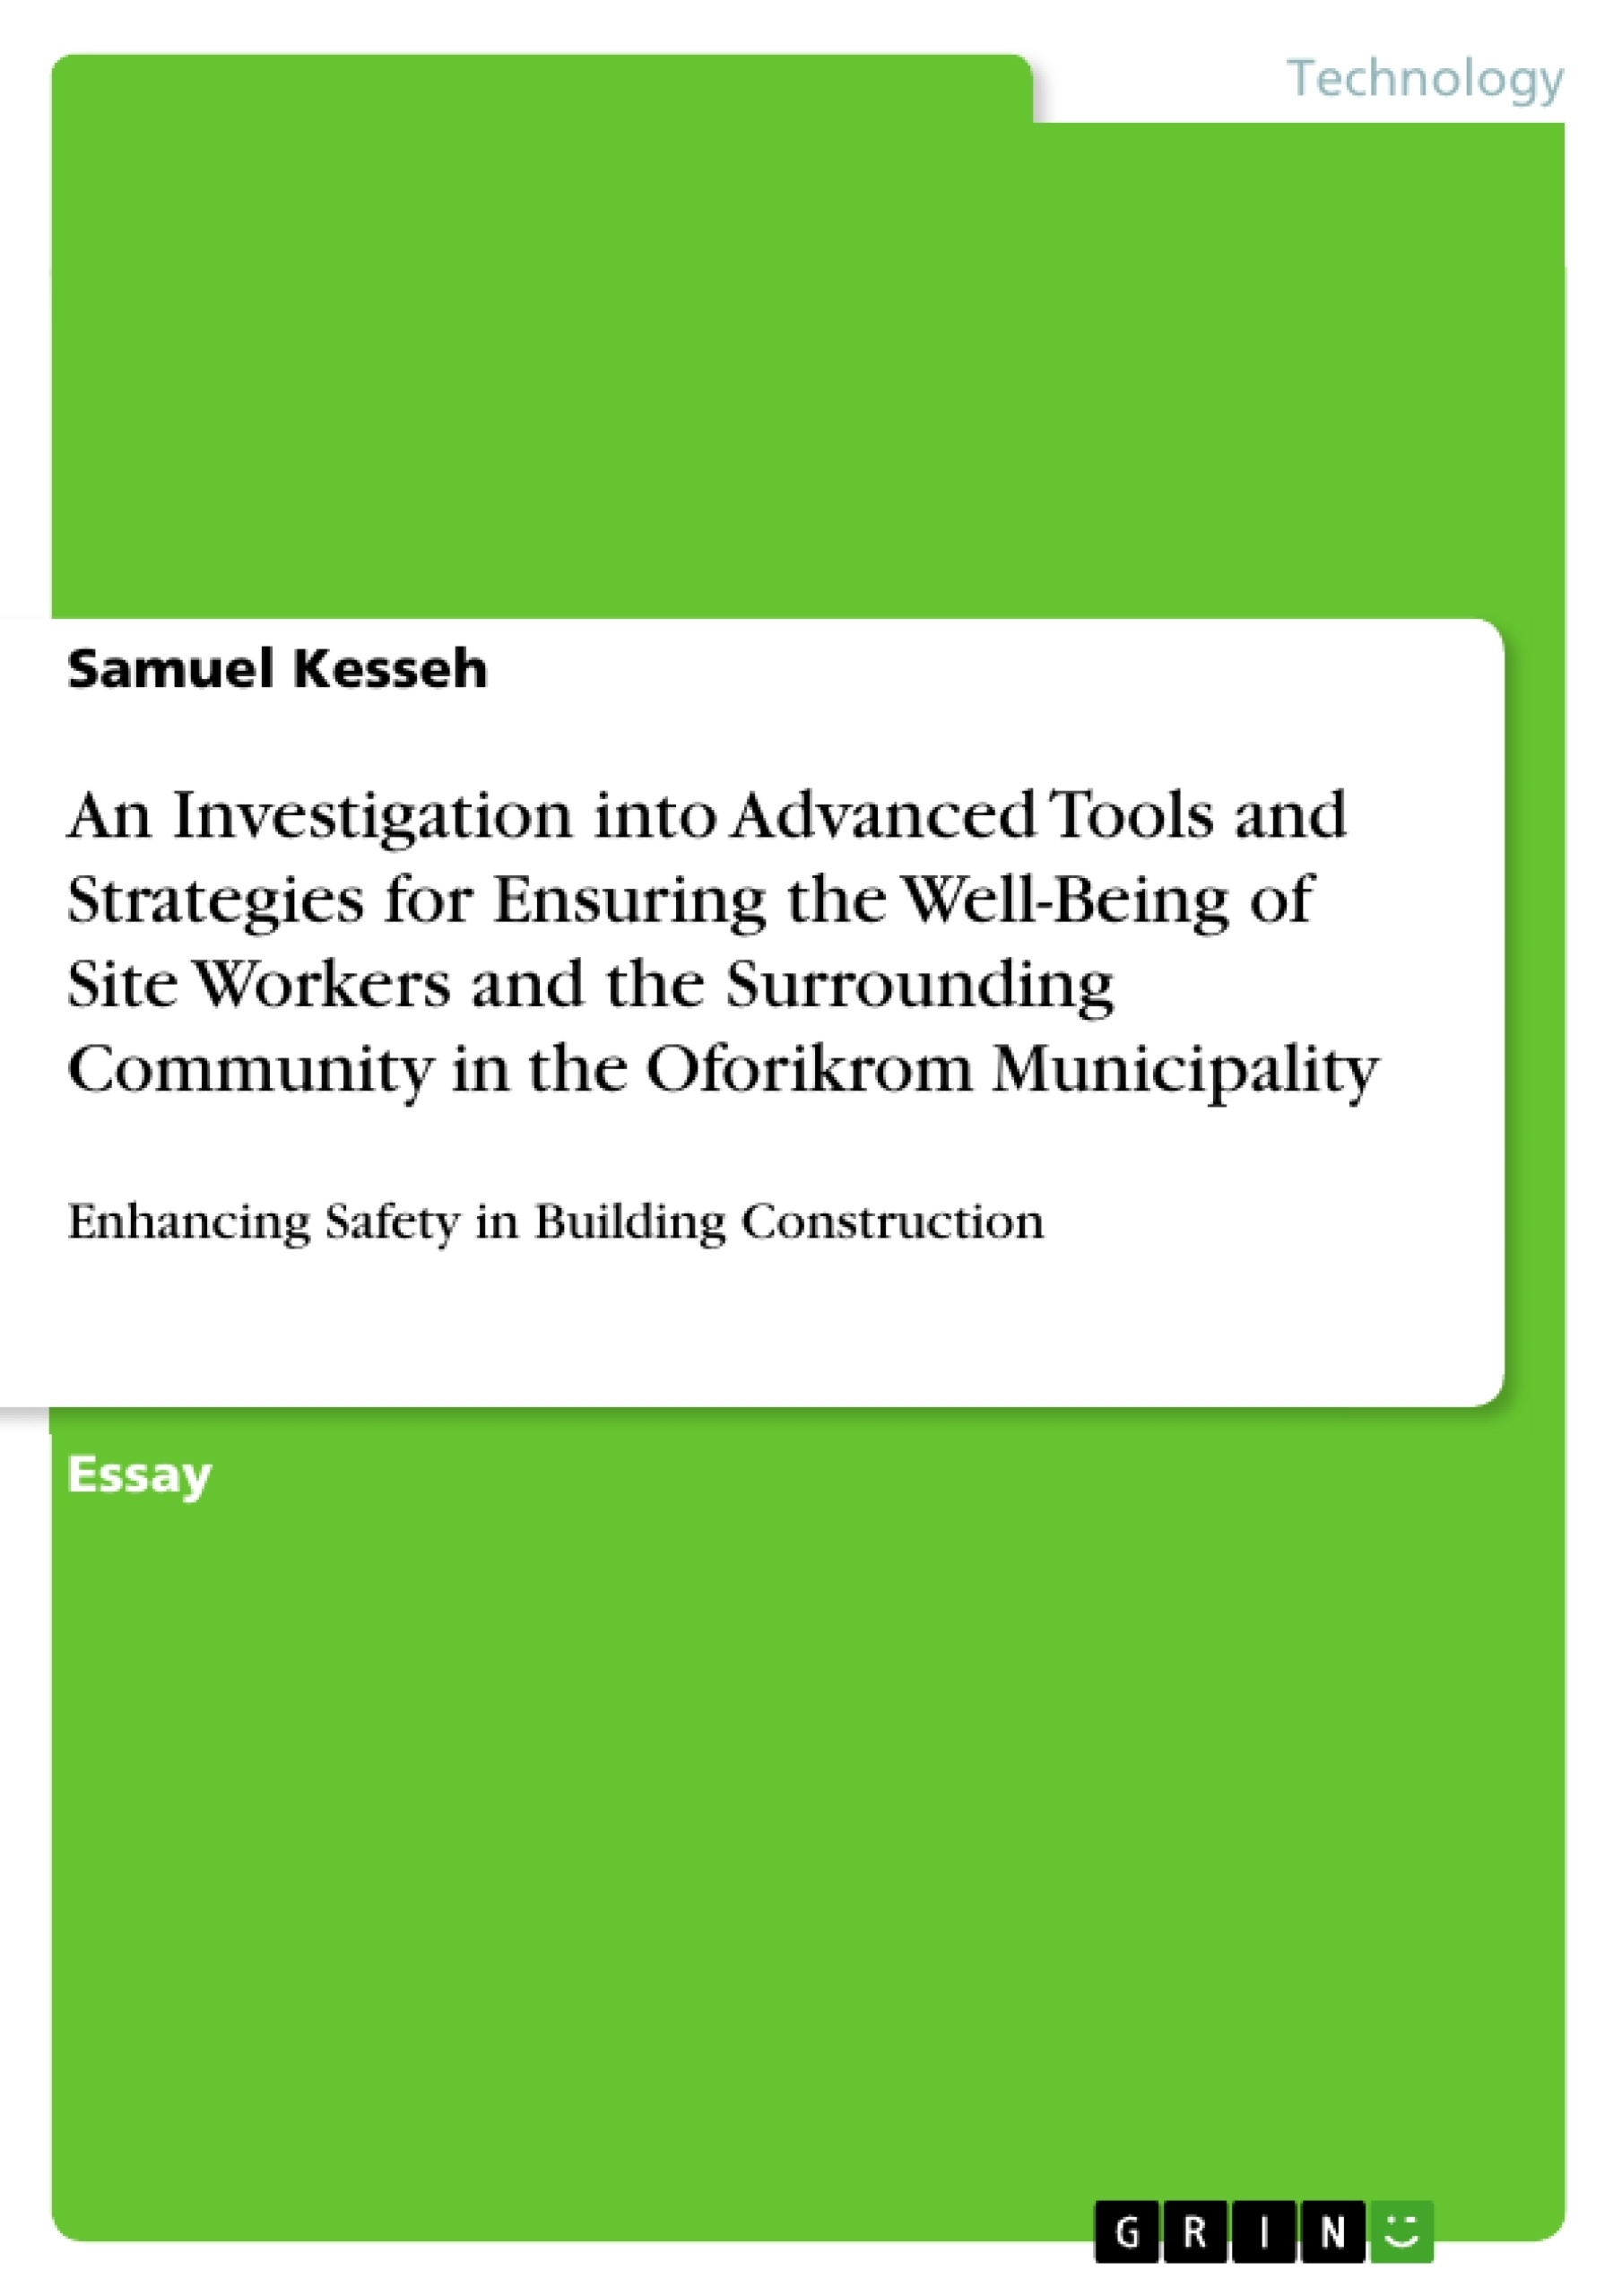 Title: An Investigation into Advanced Tools and Strategies for Ensuring the Well-Being of Site Workers and the Surrounding Community in the Oforikrom Municipality